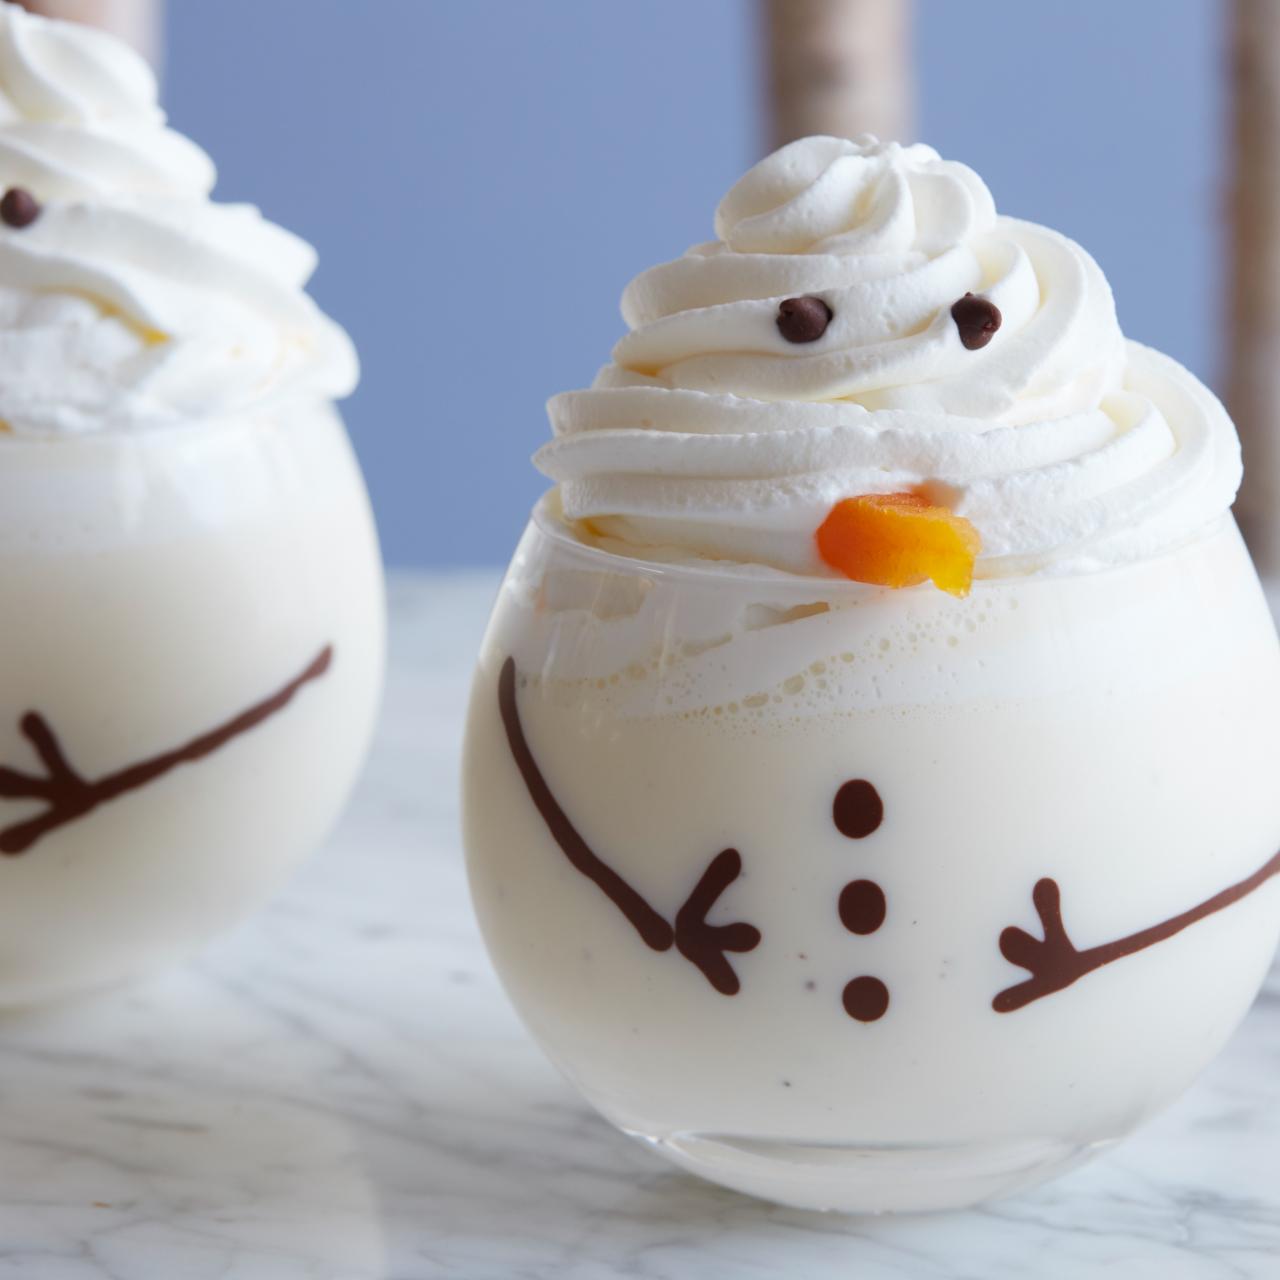 Eggnog Recipe - Kitchen Fun With My 3 Sons